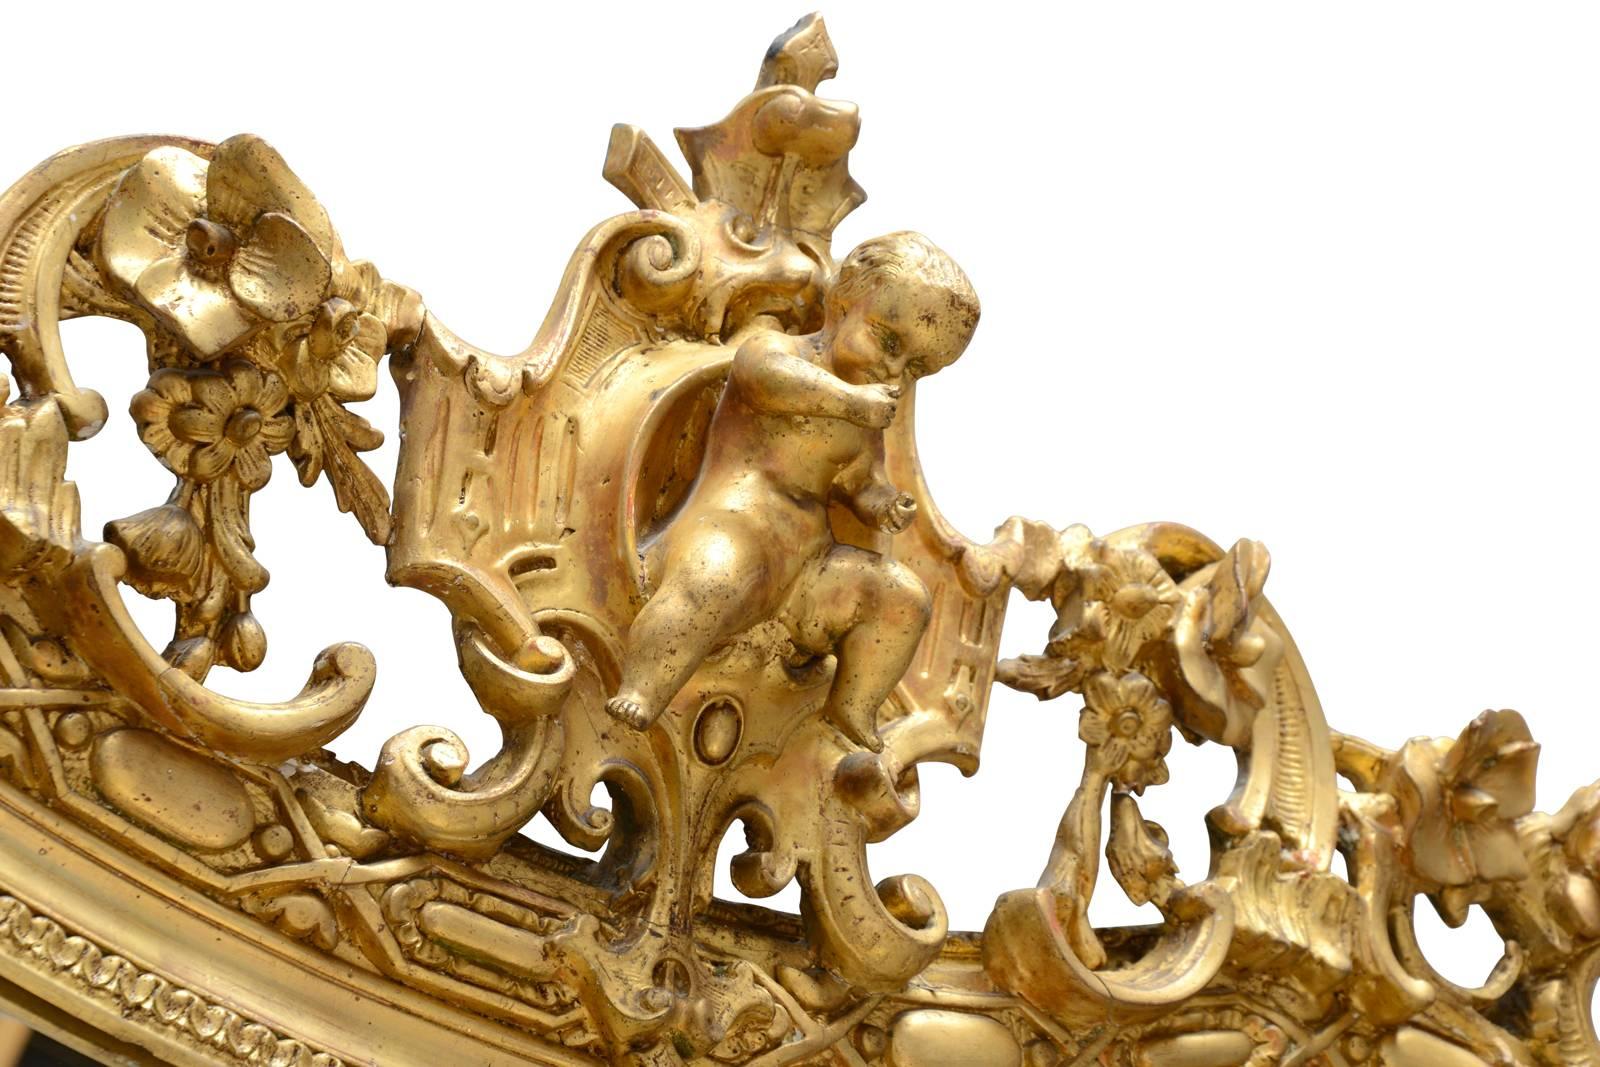 Dated from the 19th century, Napoleon III period gilded wood and stucco mirror. A double frieze of pearls and interlacing adorn the edge of the mirror. A putto at the center of a cartouche flanked by foliages, flowers and leather-cut elements